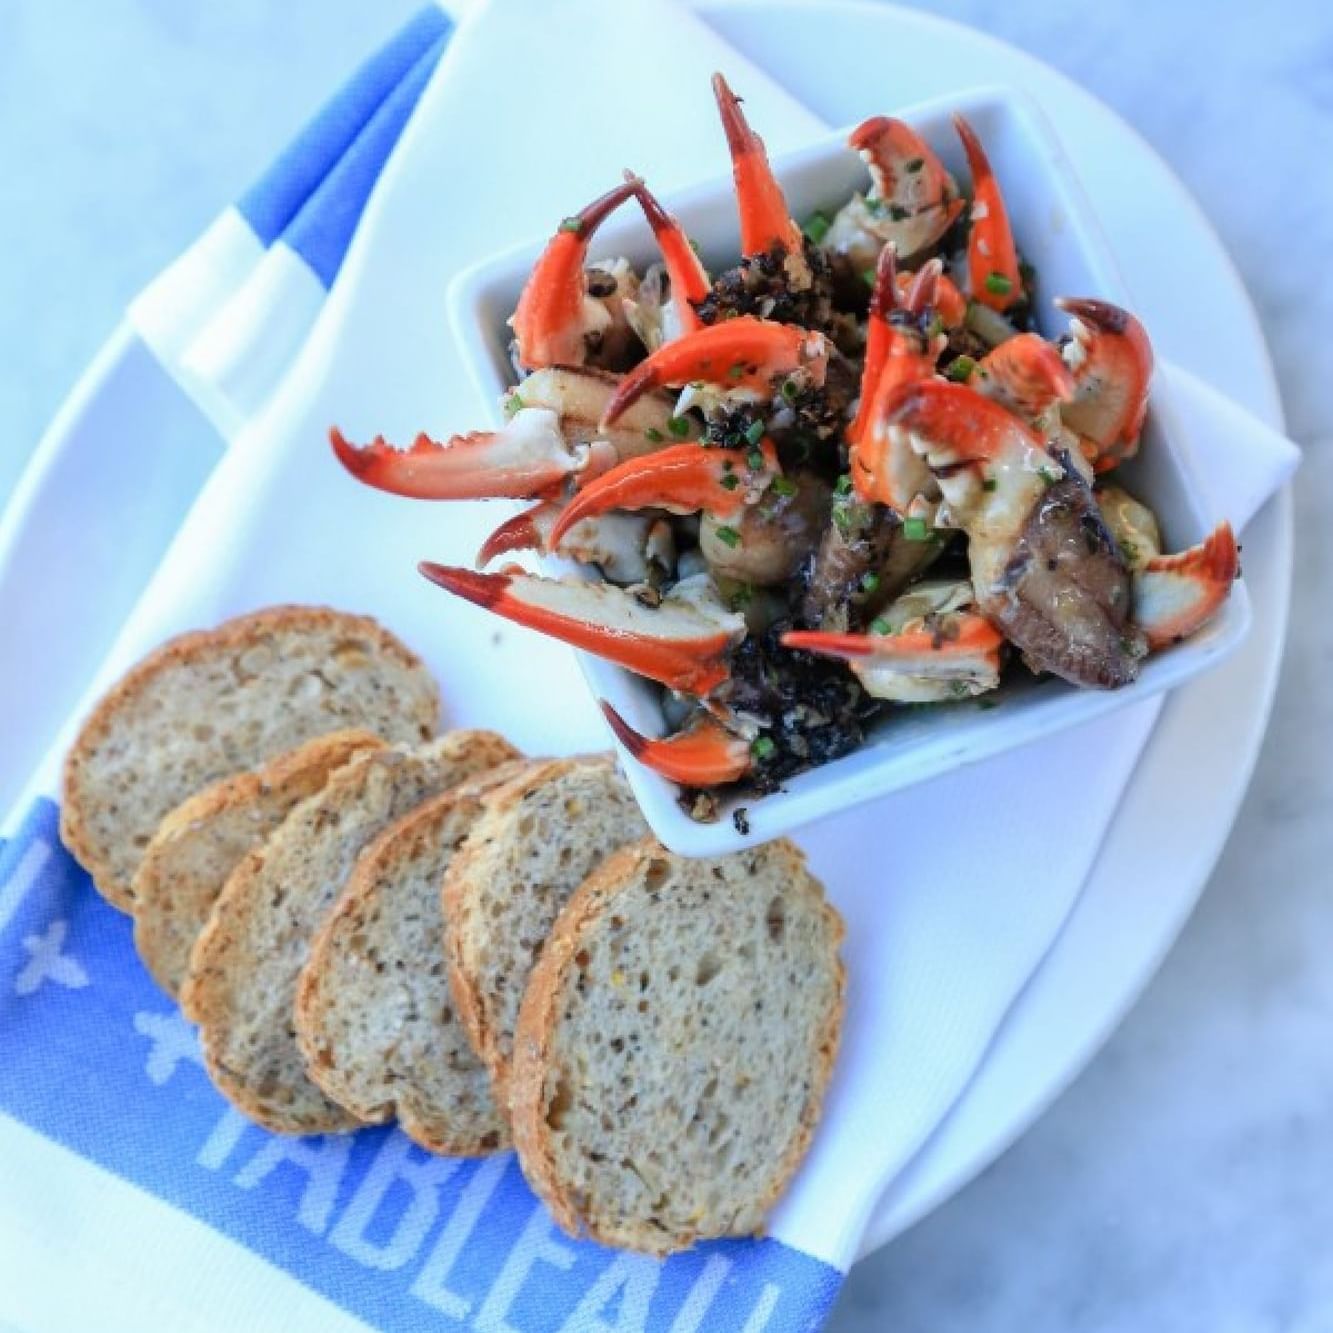 Crabs and bread served at Tableau near Andrew Jackson Hotel